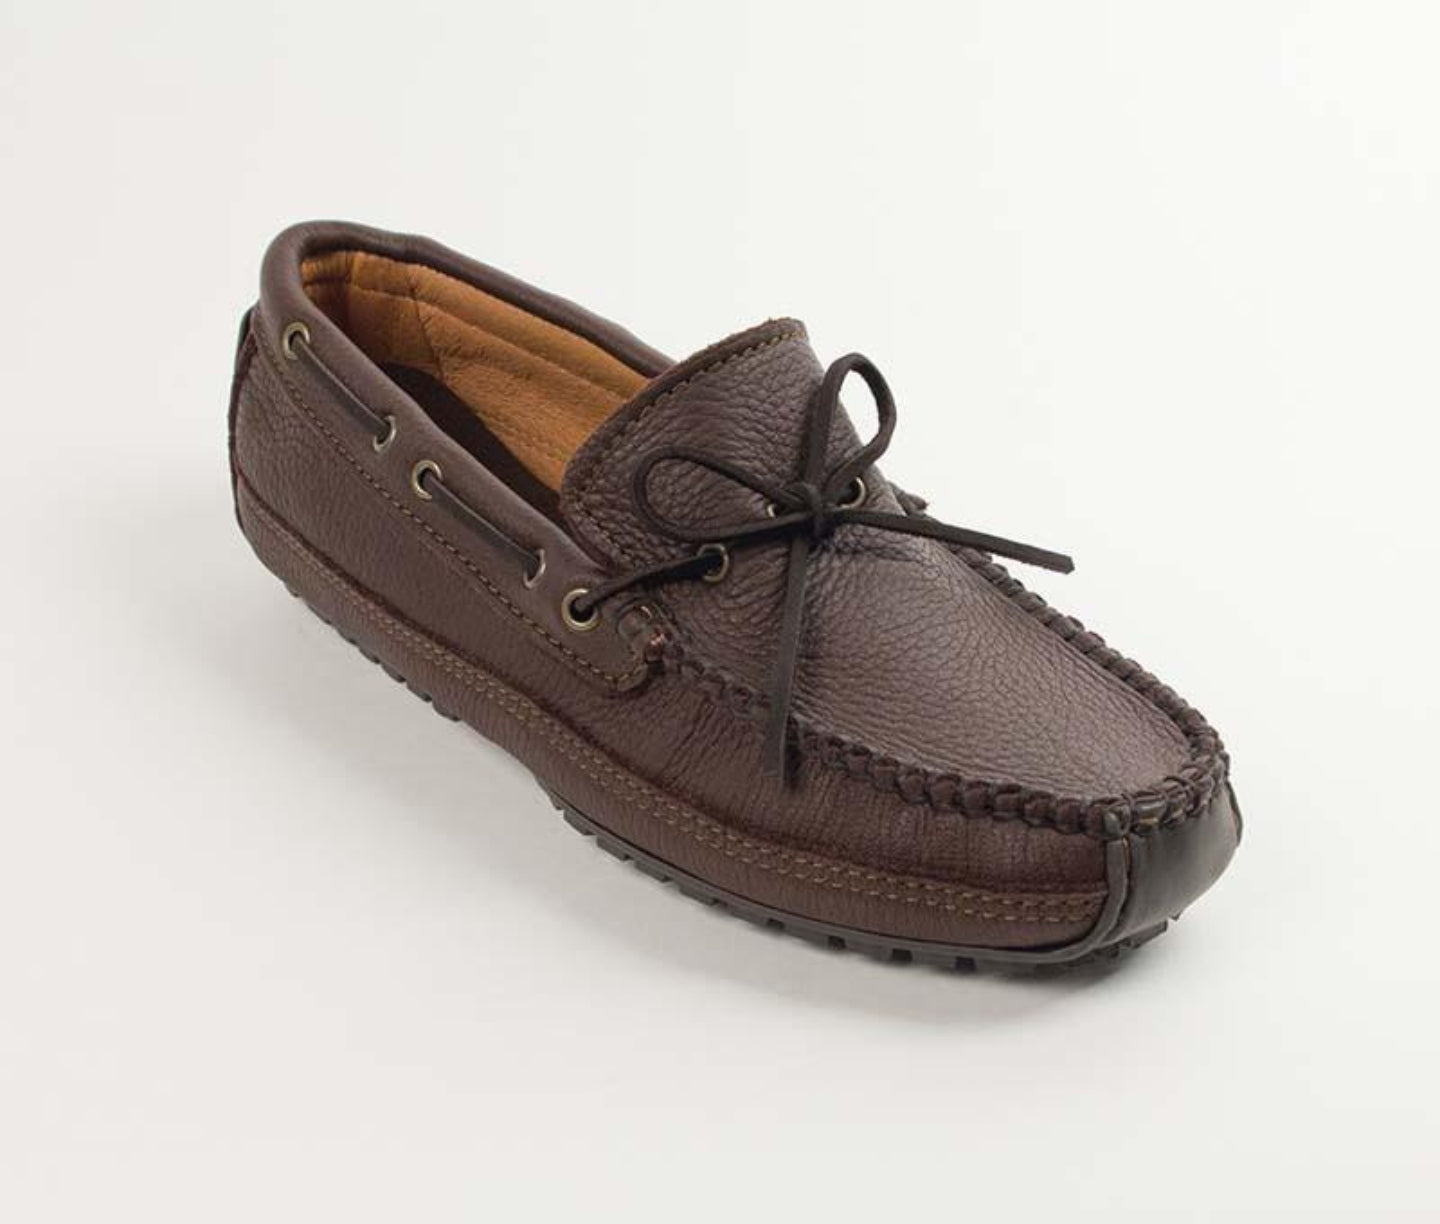 Moosehide Weekender Moccasin in Chocolate from 3/4 Angle View